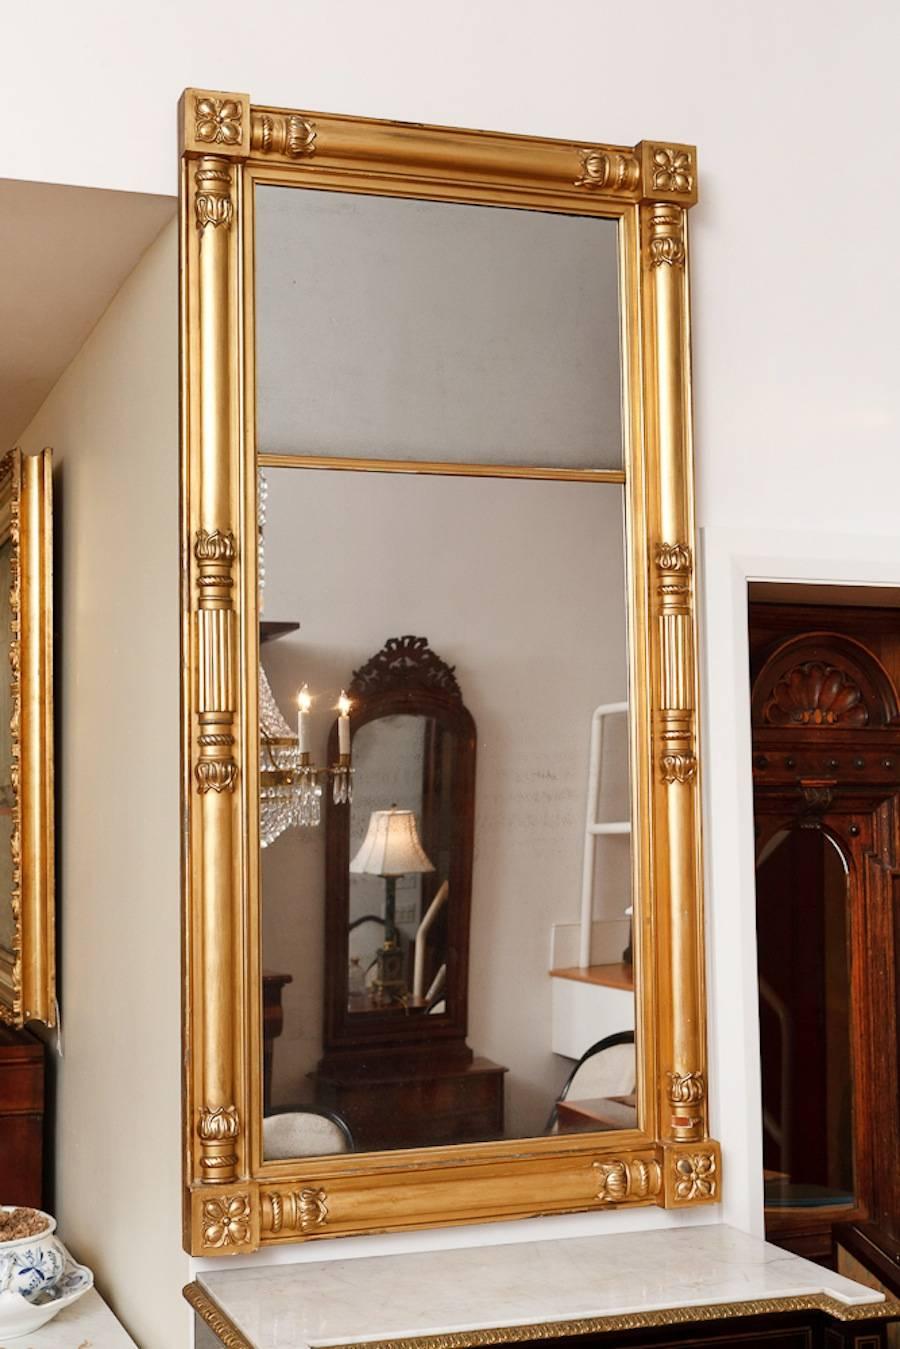 A very beautiful gold leaf Federal mirror attributable to Isaac Platt, with turned and carved pilasters framing original glass, New York City, circa 1820.
Measure: 32 1/2